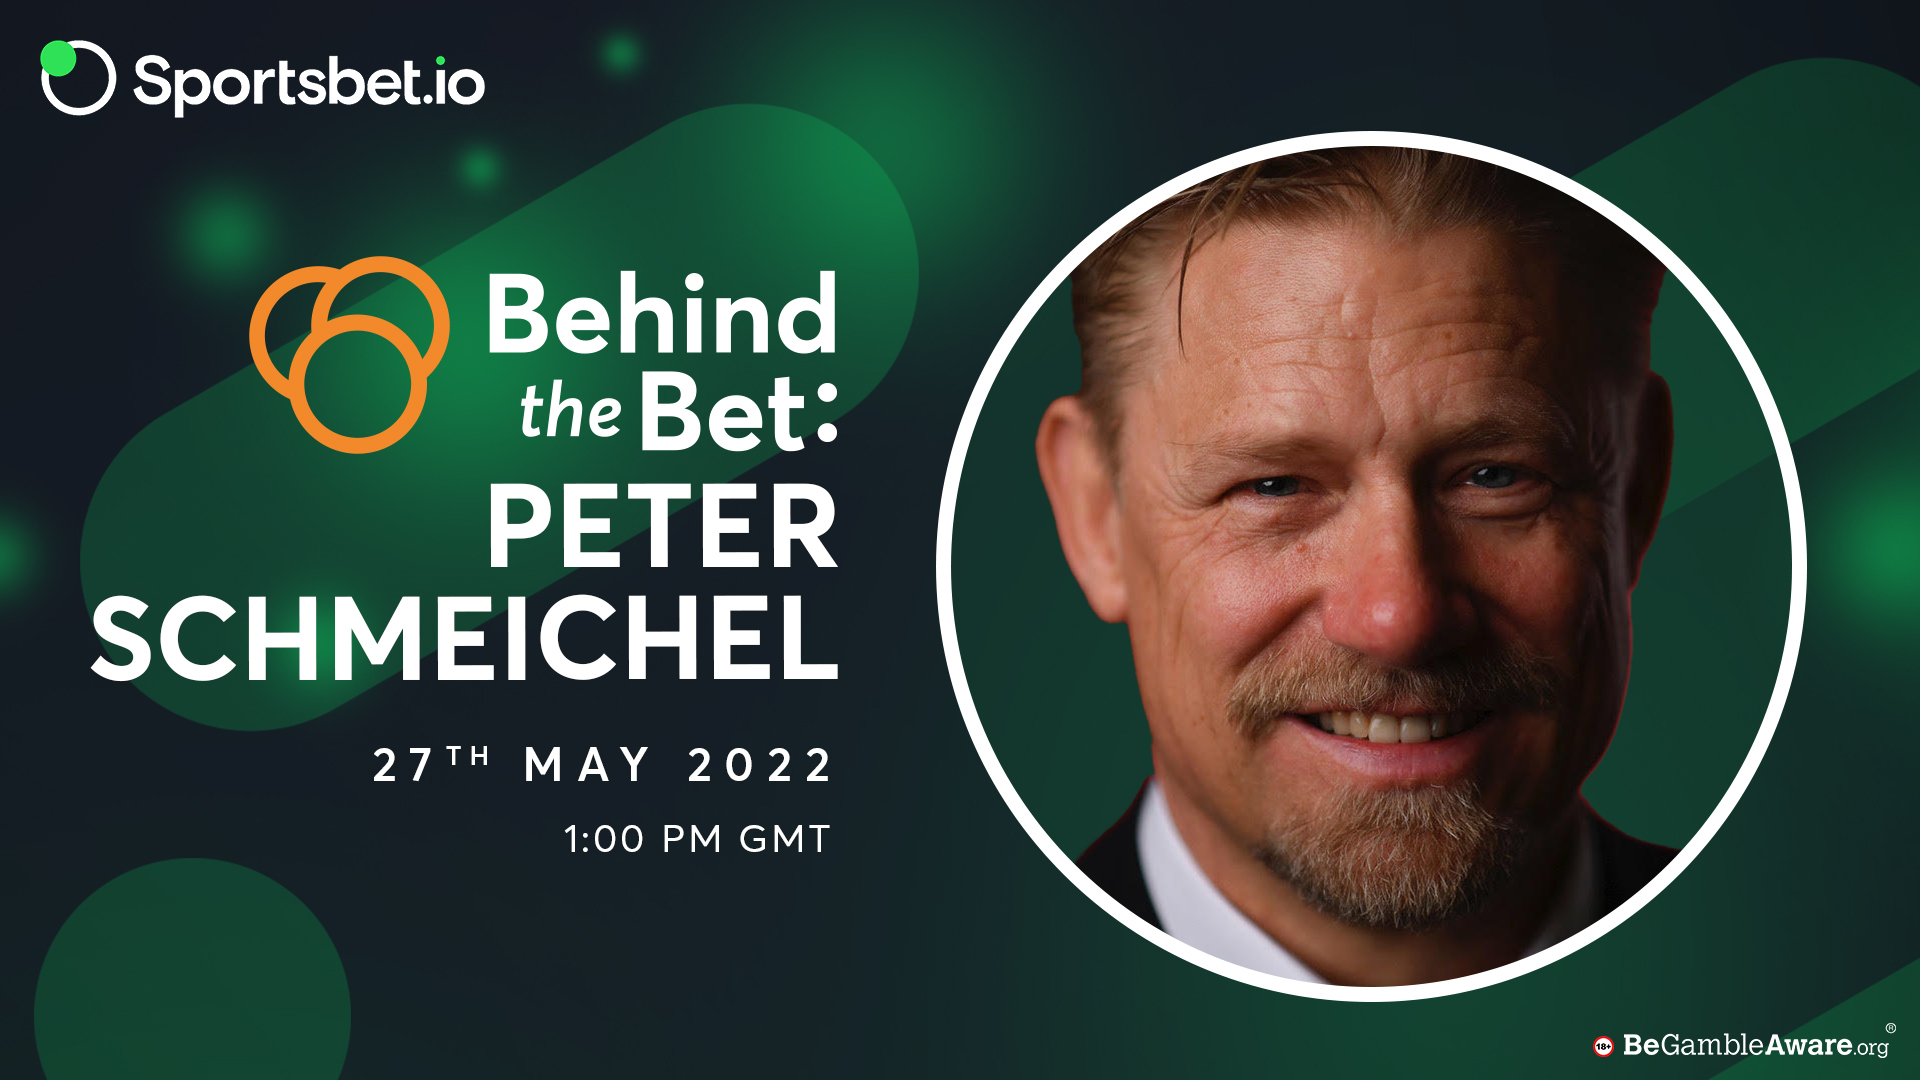 Behind the Bet with Peter Schmeichel